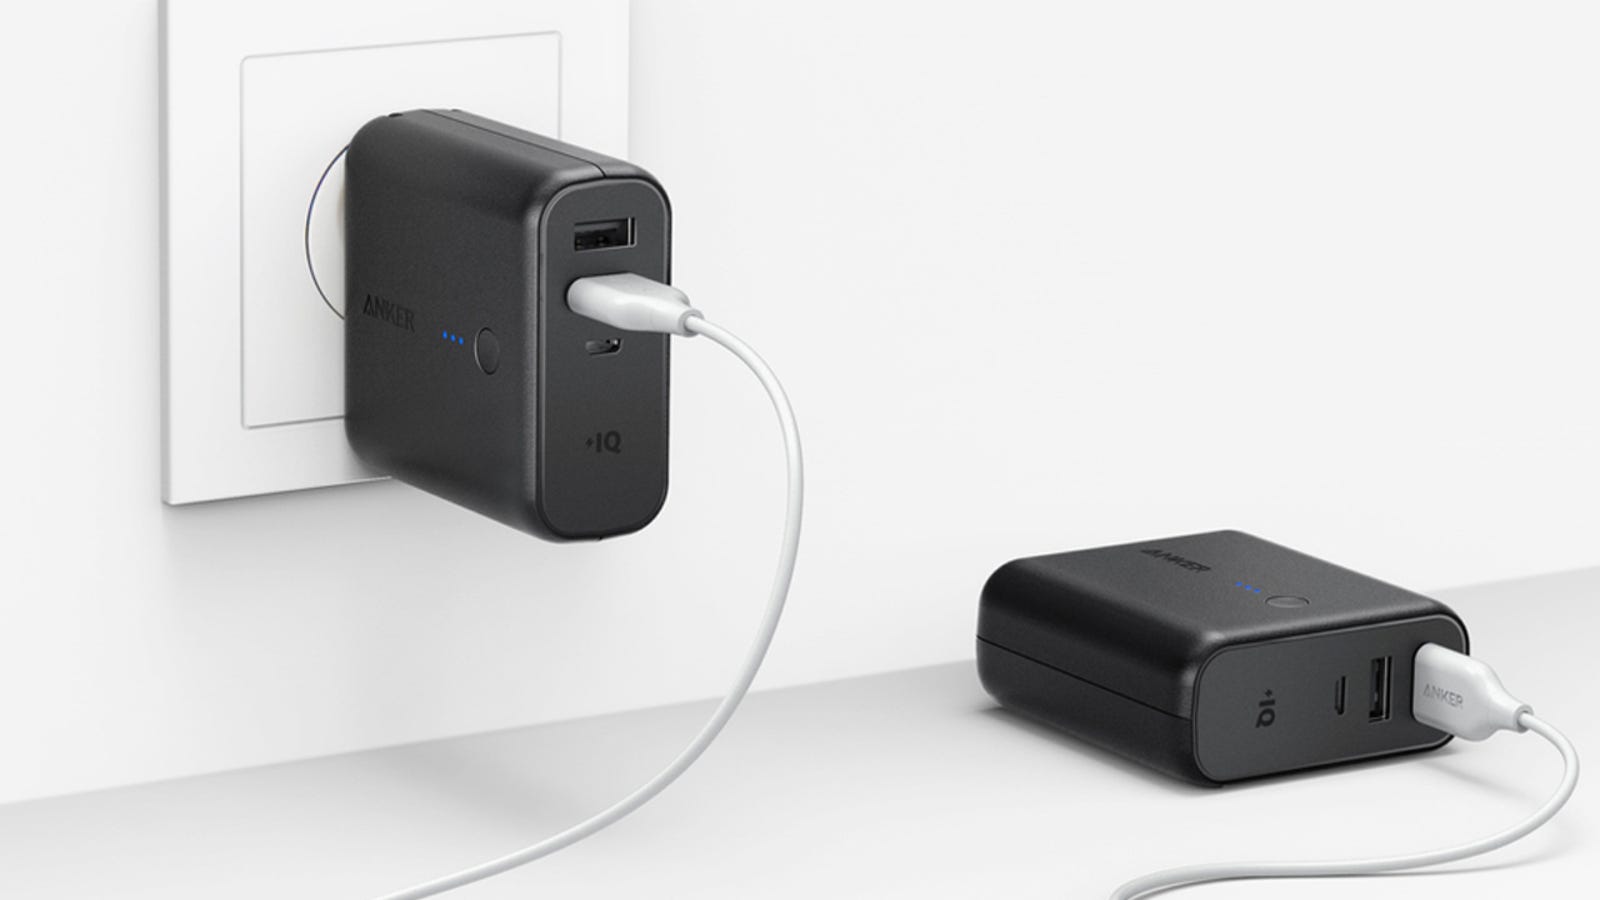 The Best USB Travel Charger Is Anker's PowerCore Fusion, According To Our Readers